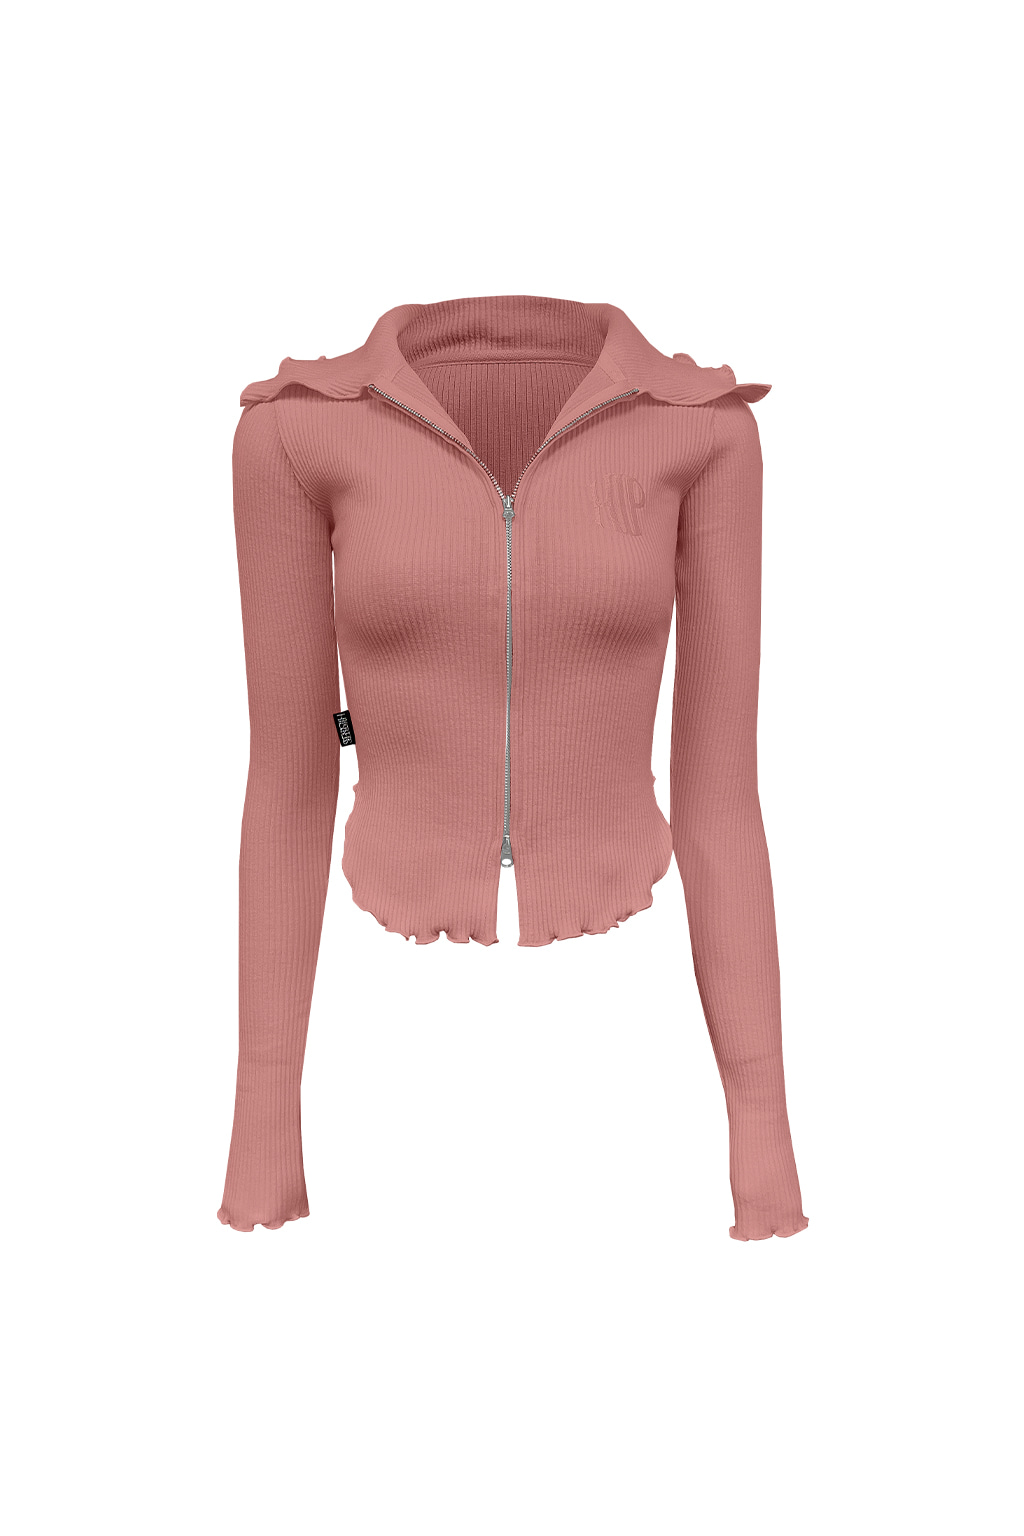 Ribbed Tension Two Way Glamour Zip Up Indie Pink